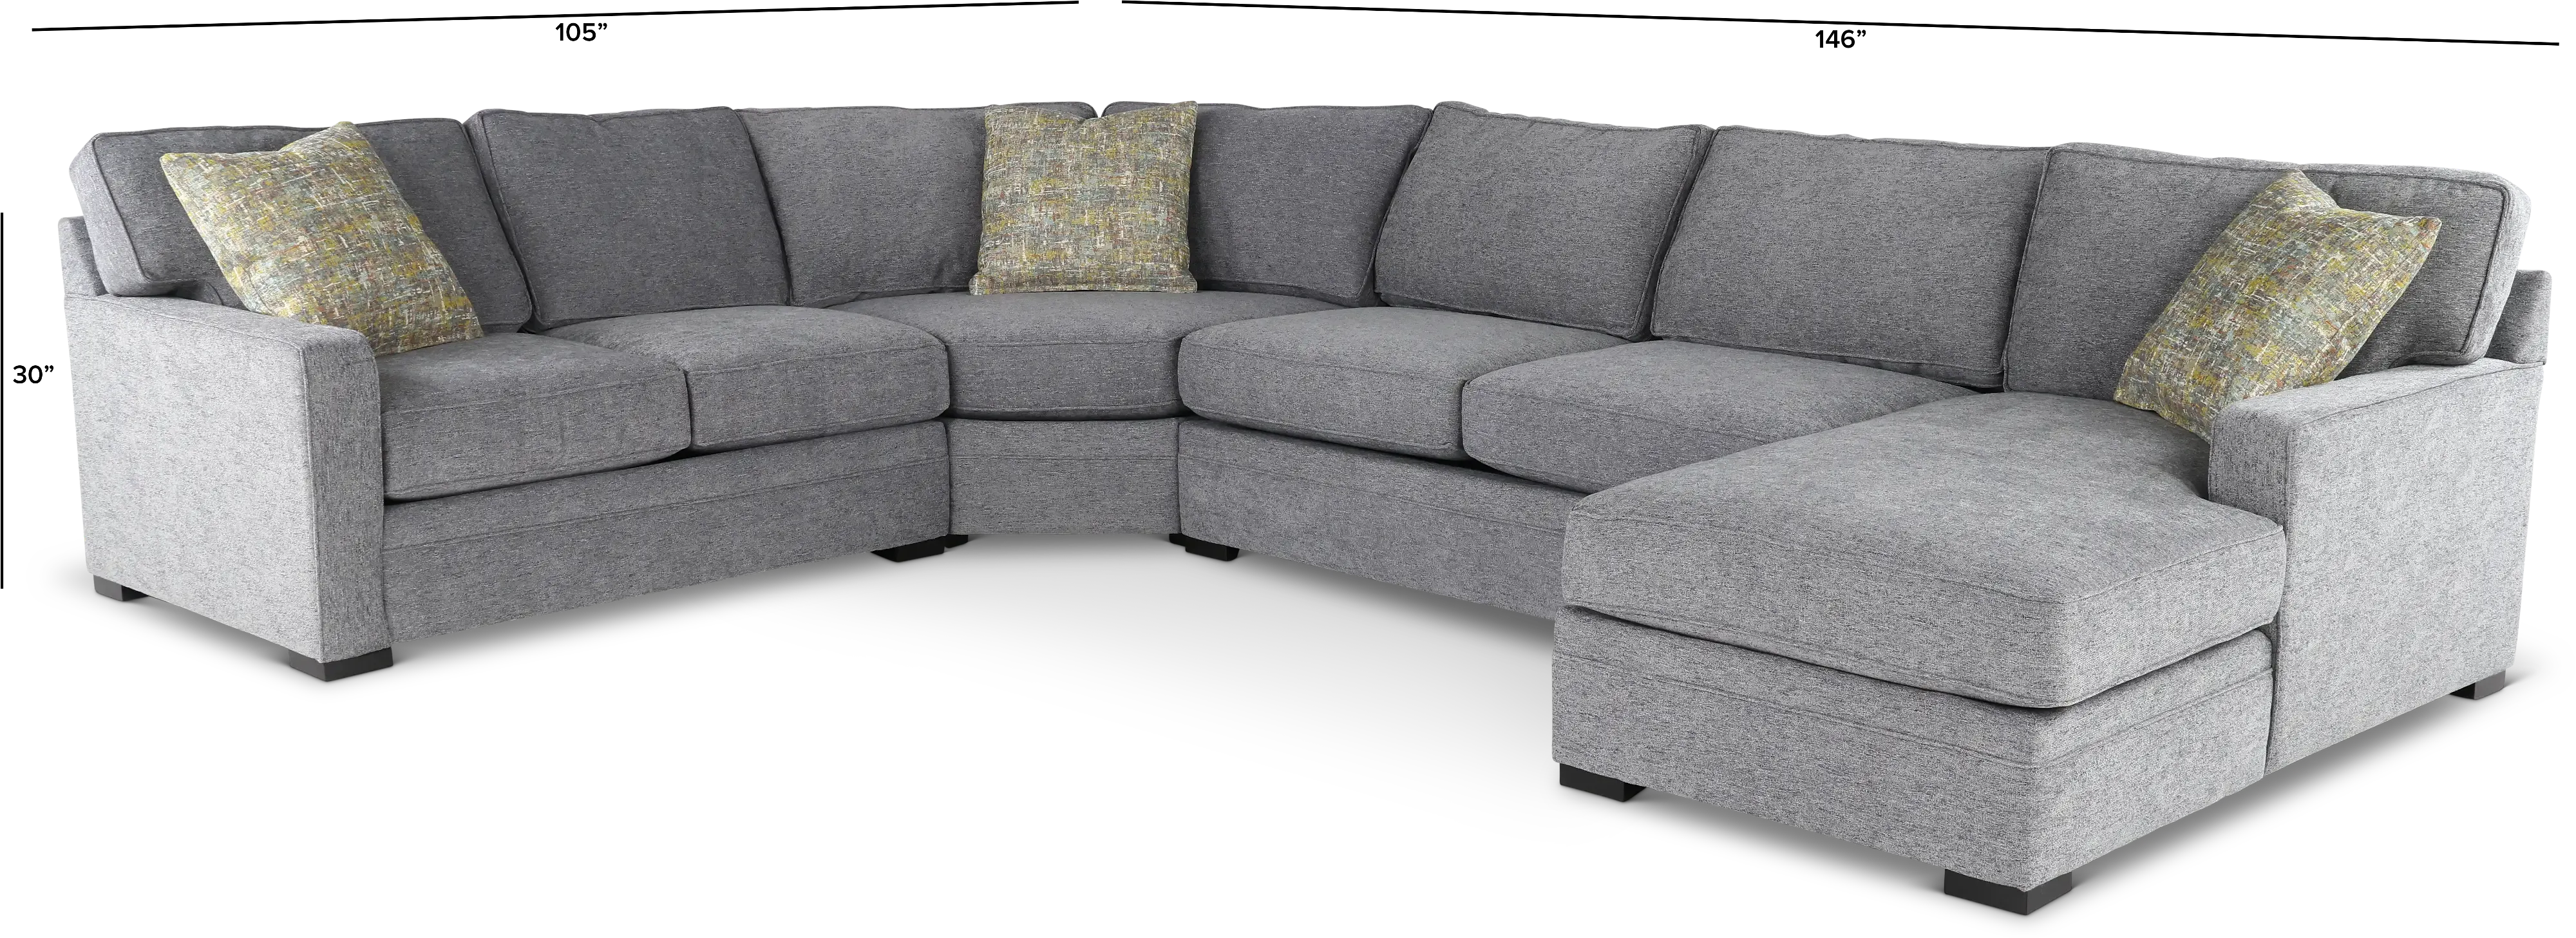 Juno Gray 4 Piece Sectional